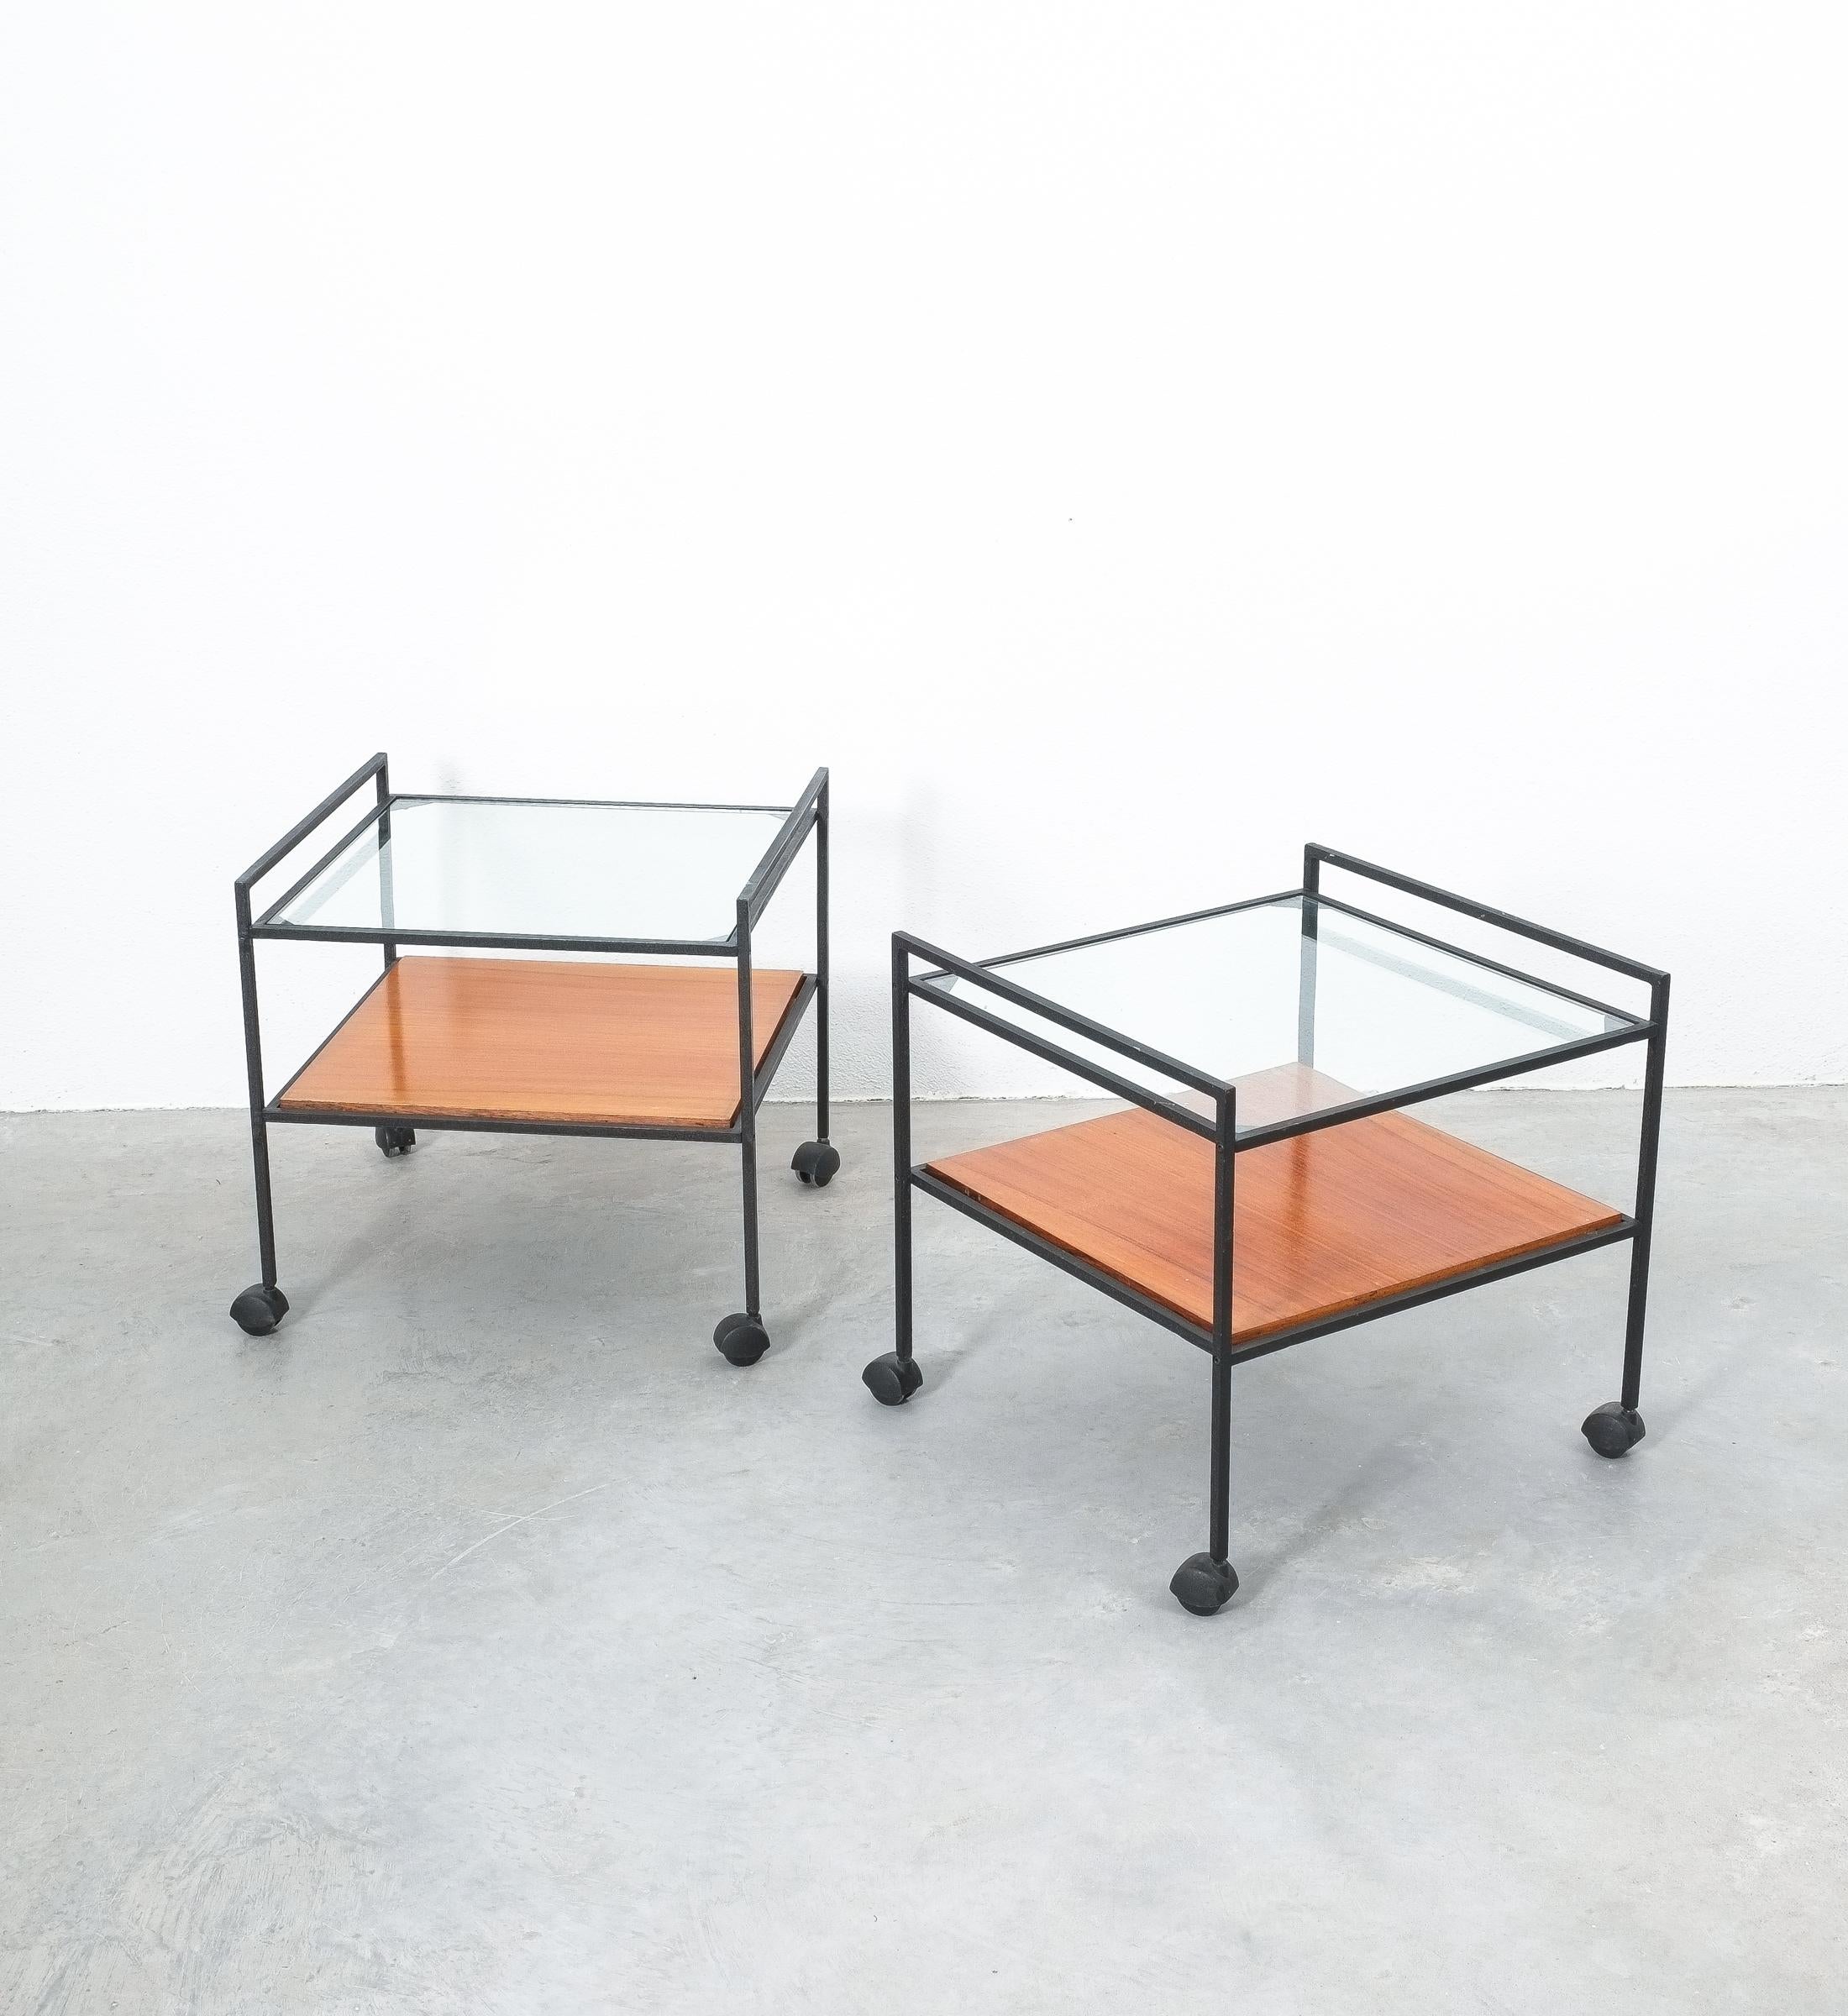 Pair of glass wood iron tables, Italy, 1960

Nice pair of glass and wood coffee tables, priced as a pair. Identical tables both on casters. They can be used as side tables also due to the size (approximate 20 x 20 x 20